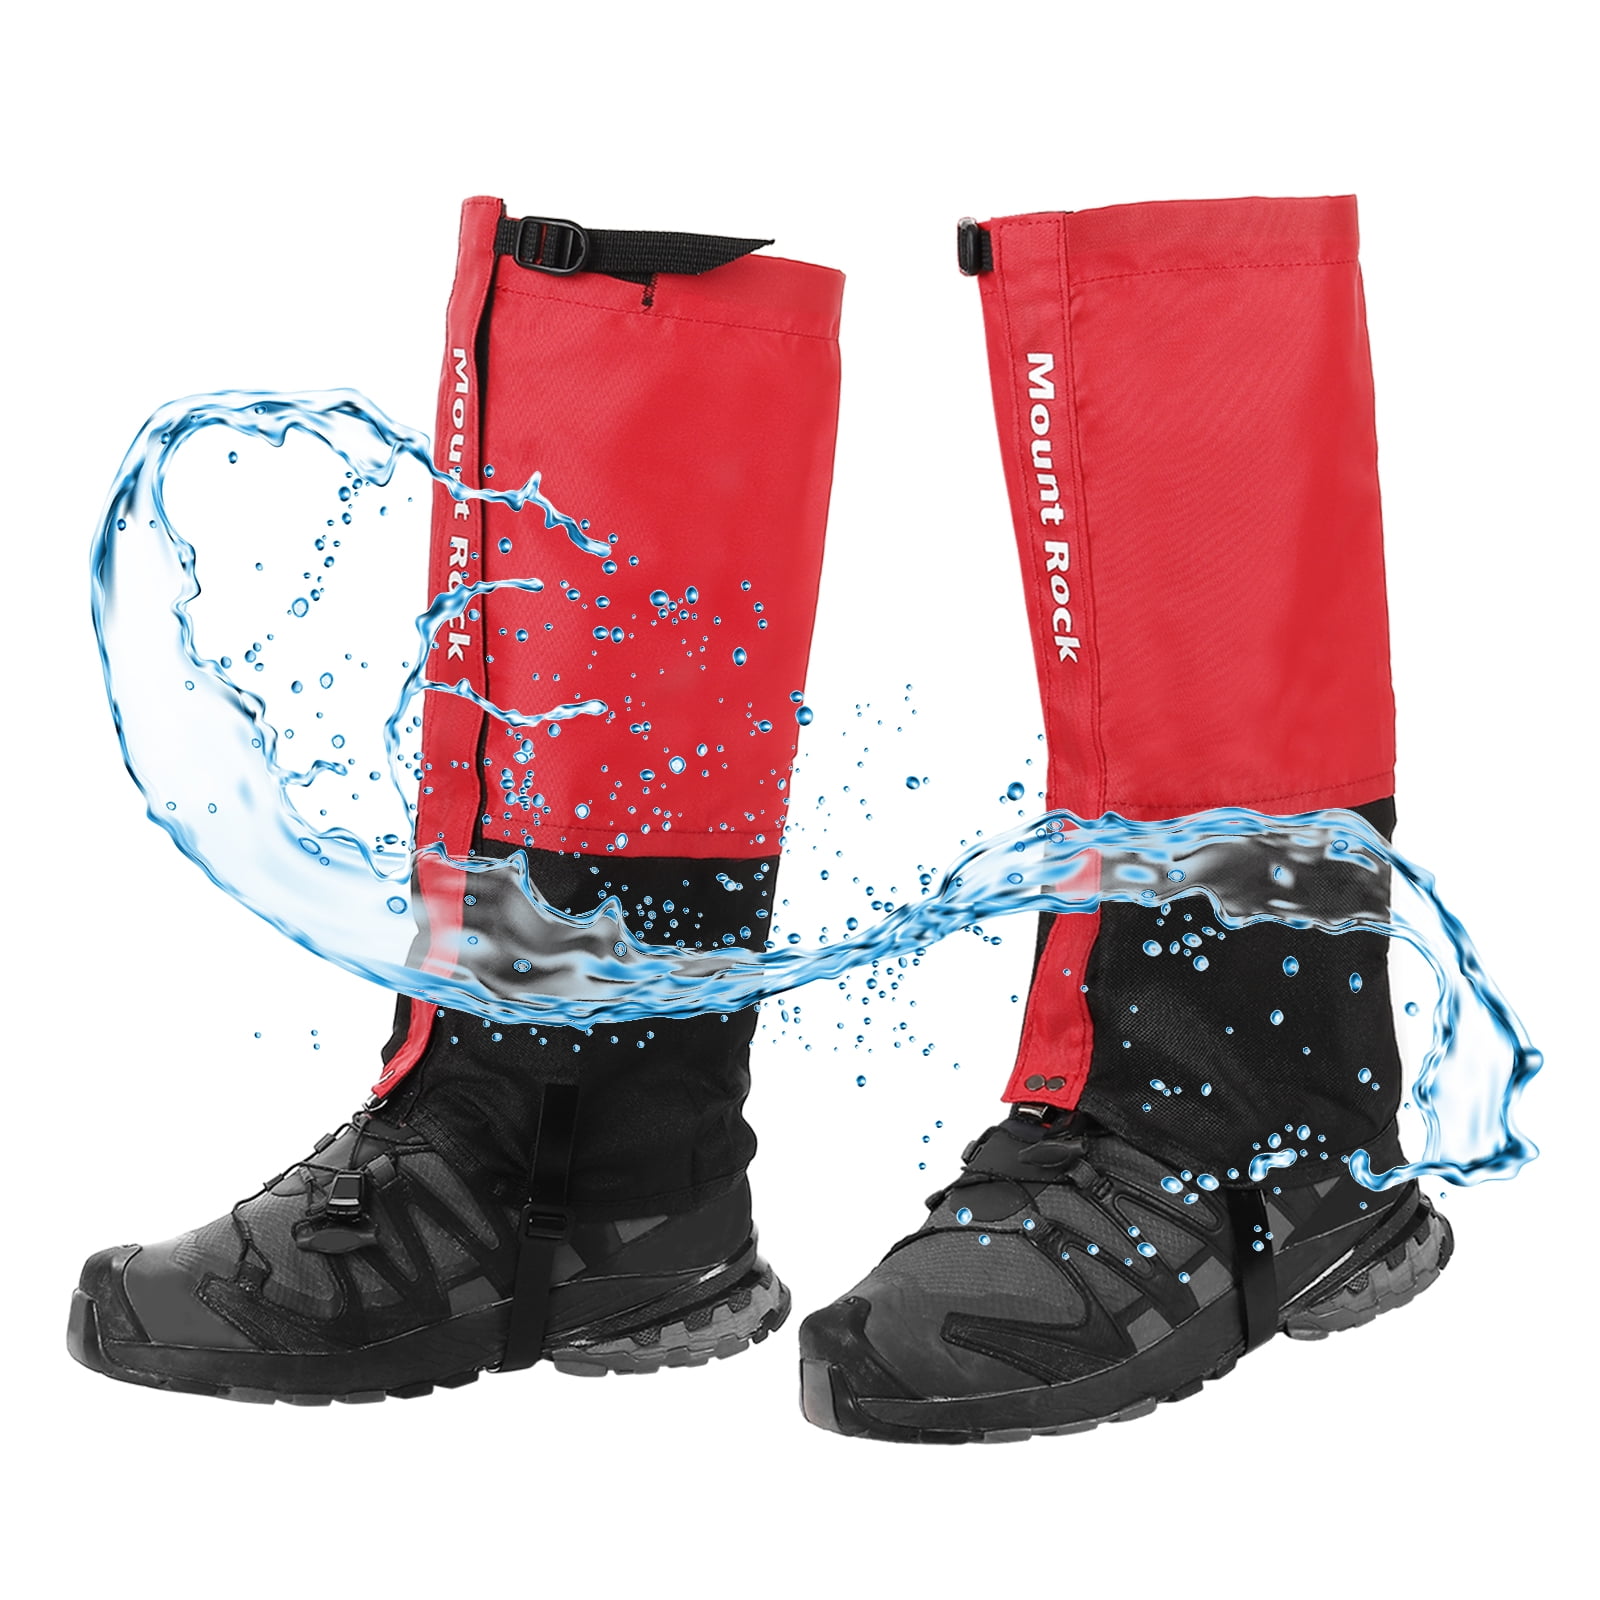 Uxcell Leg Gaiters, Waterproof Shoe Covers Adjustable Snow Boot